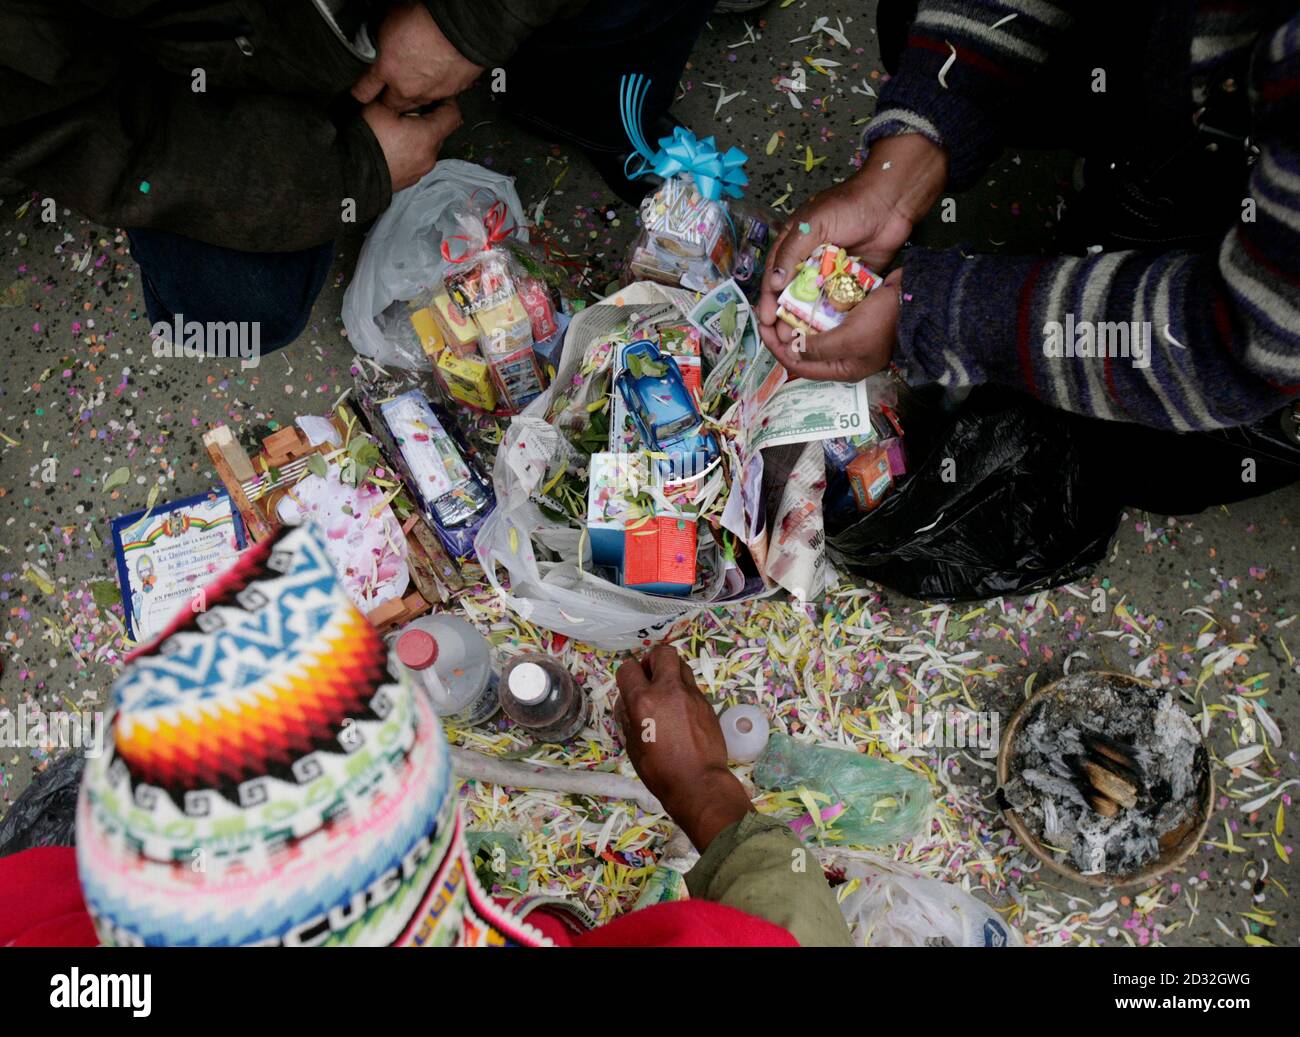 A Bolivian Indian witchdoctor (bottom) blesses the goods of a couple during the traditional 'Alasitas' fair in La Paz January 24, 2010. During this fair, Bolivians buy miniature versions of goods like cars, money and houses they would like to own in real life during the year.  REUTERS/Mariana Bazo (BOLIVIA - Tags: SOCIETY) Stock Photo